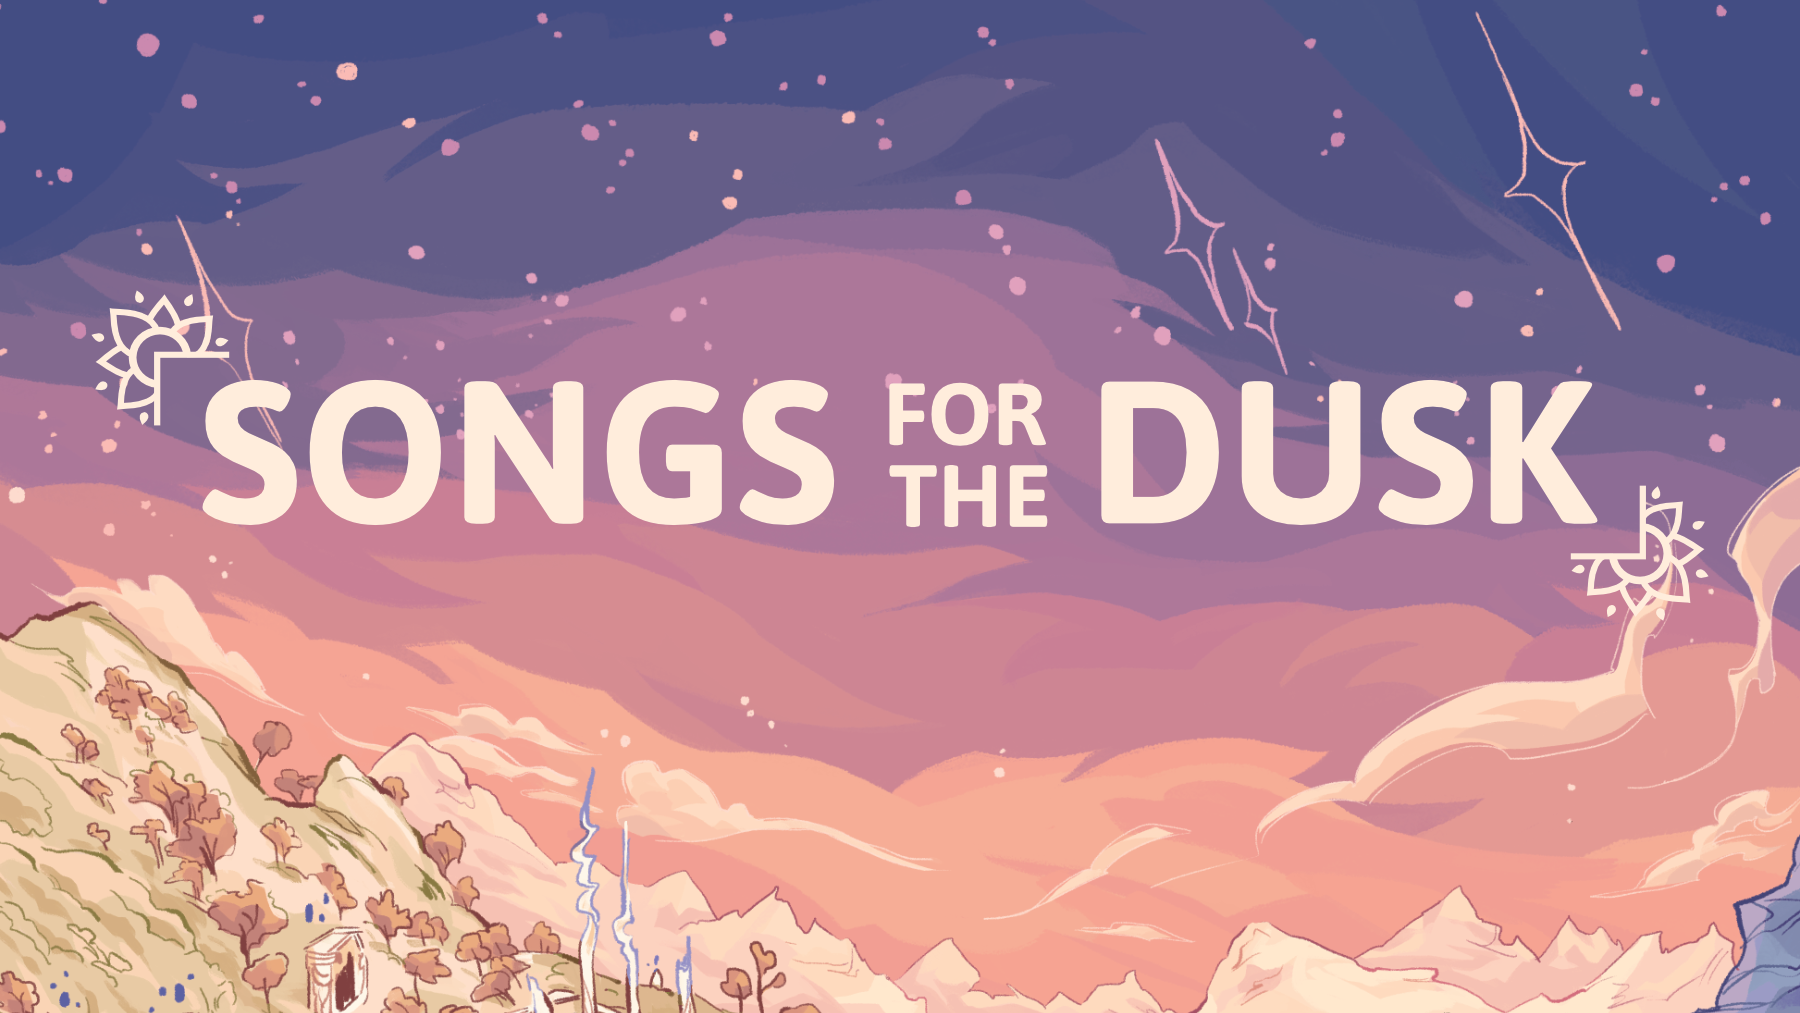 Songs for the Dusk brings you into a science-fantasy post-apocalypse